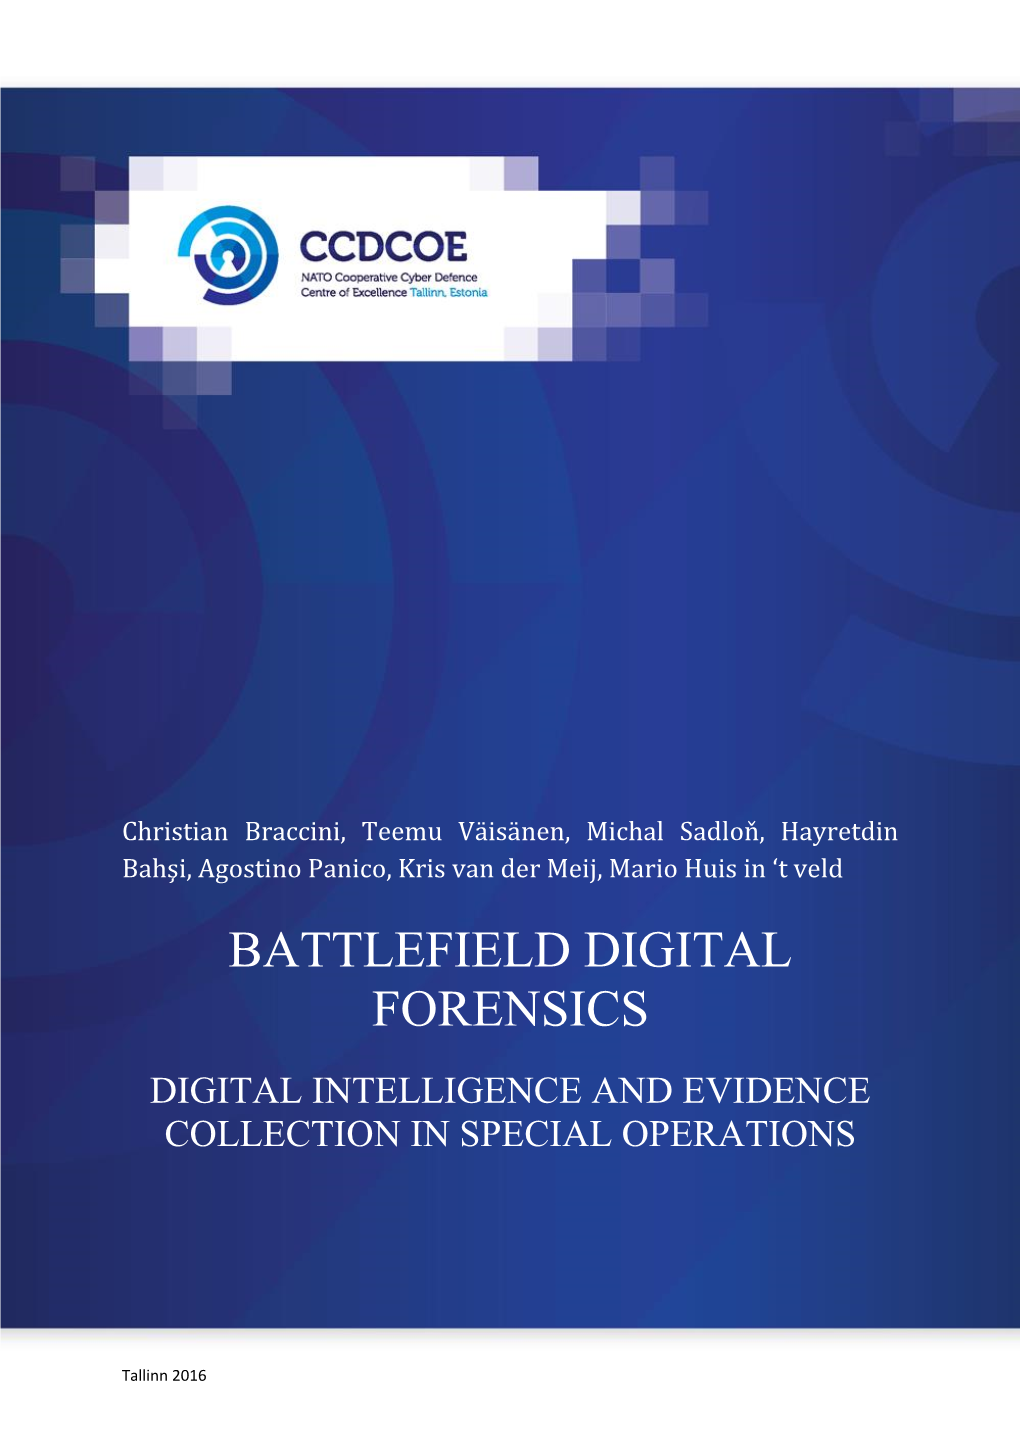 Battlefield Digital Forensics Digital Intelligence and Evidence Collection in Special Operations